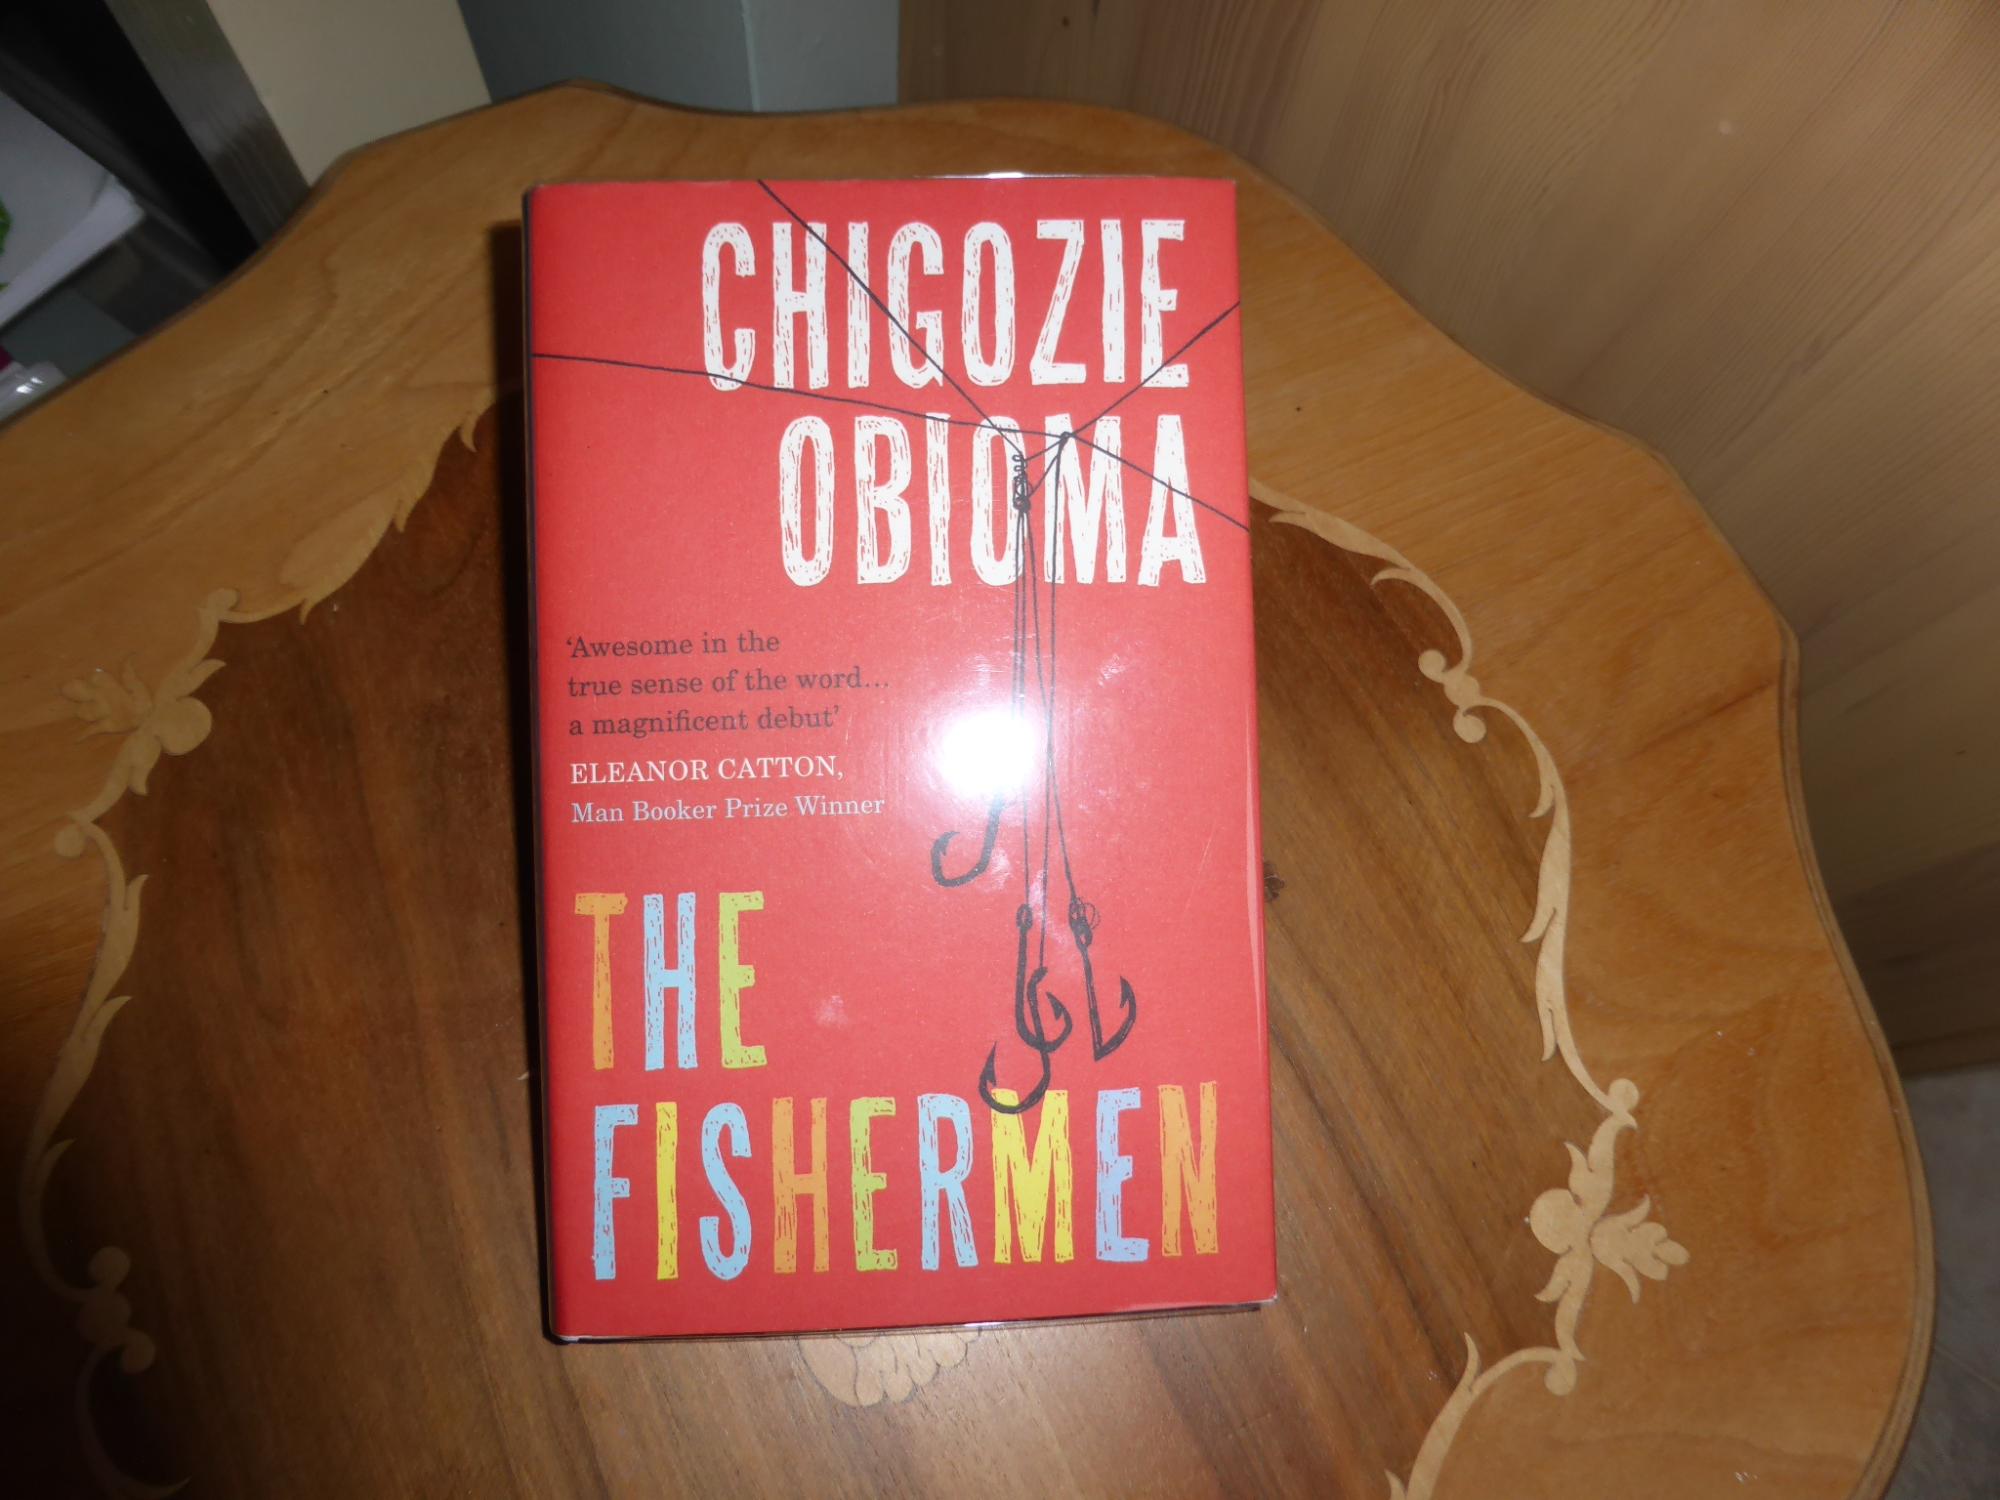 The Fishermen: MINT SIGNED LINED & PUBLICATION DAY DATED FIRST EDITION - Chigozie Obioma